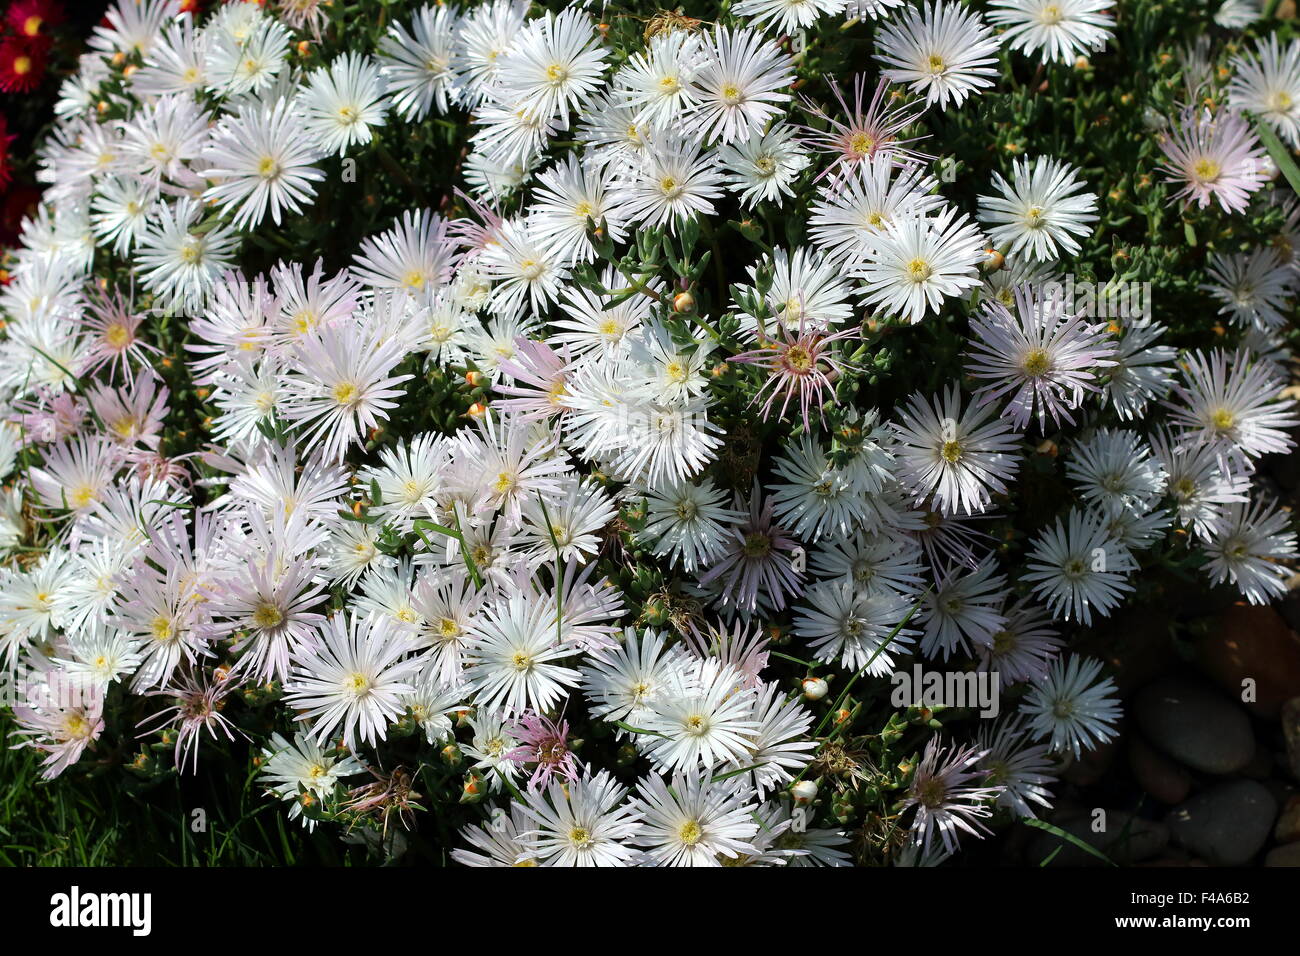 White Pig face flowers or Mesembryanthemum , ice plant flowers, Livingstone Daisies in full bloom Stock Photo